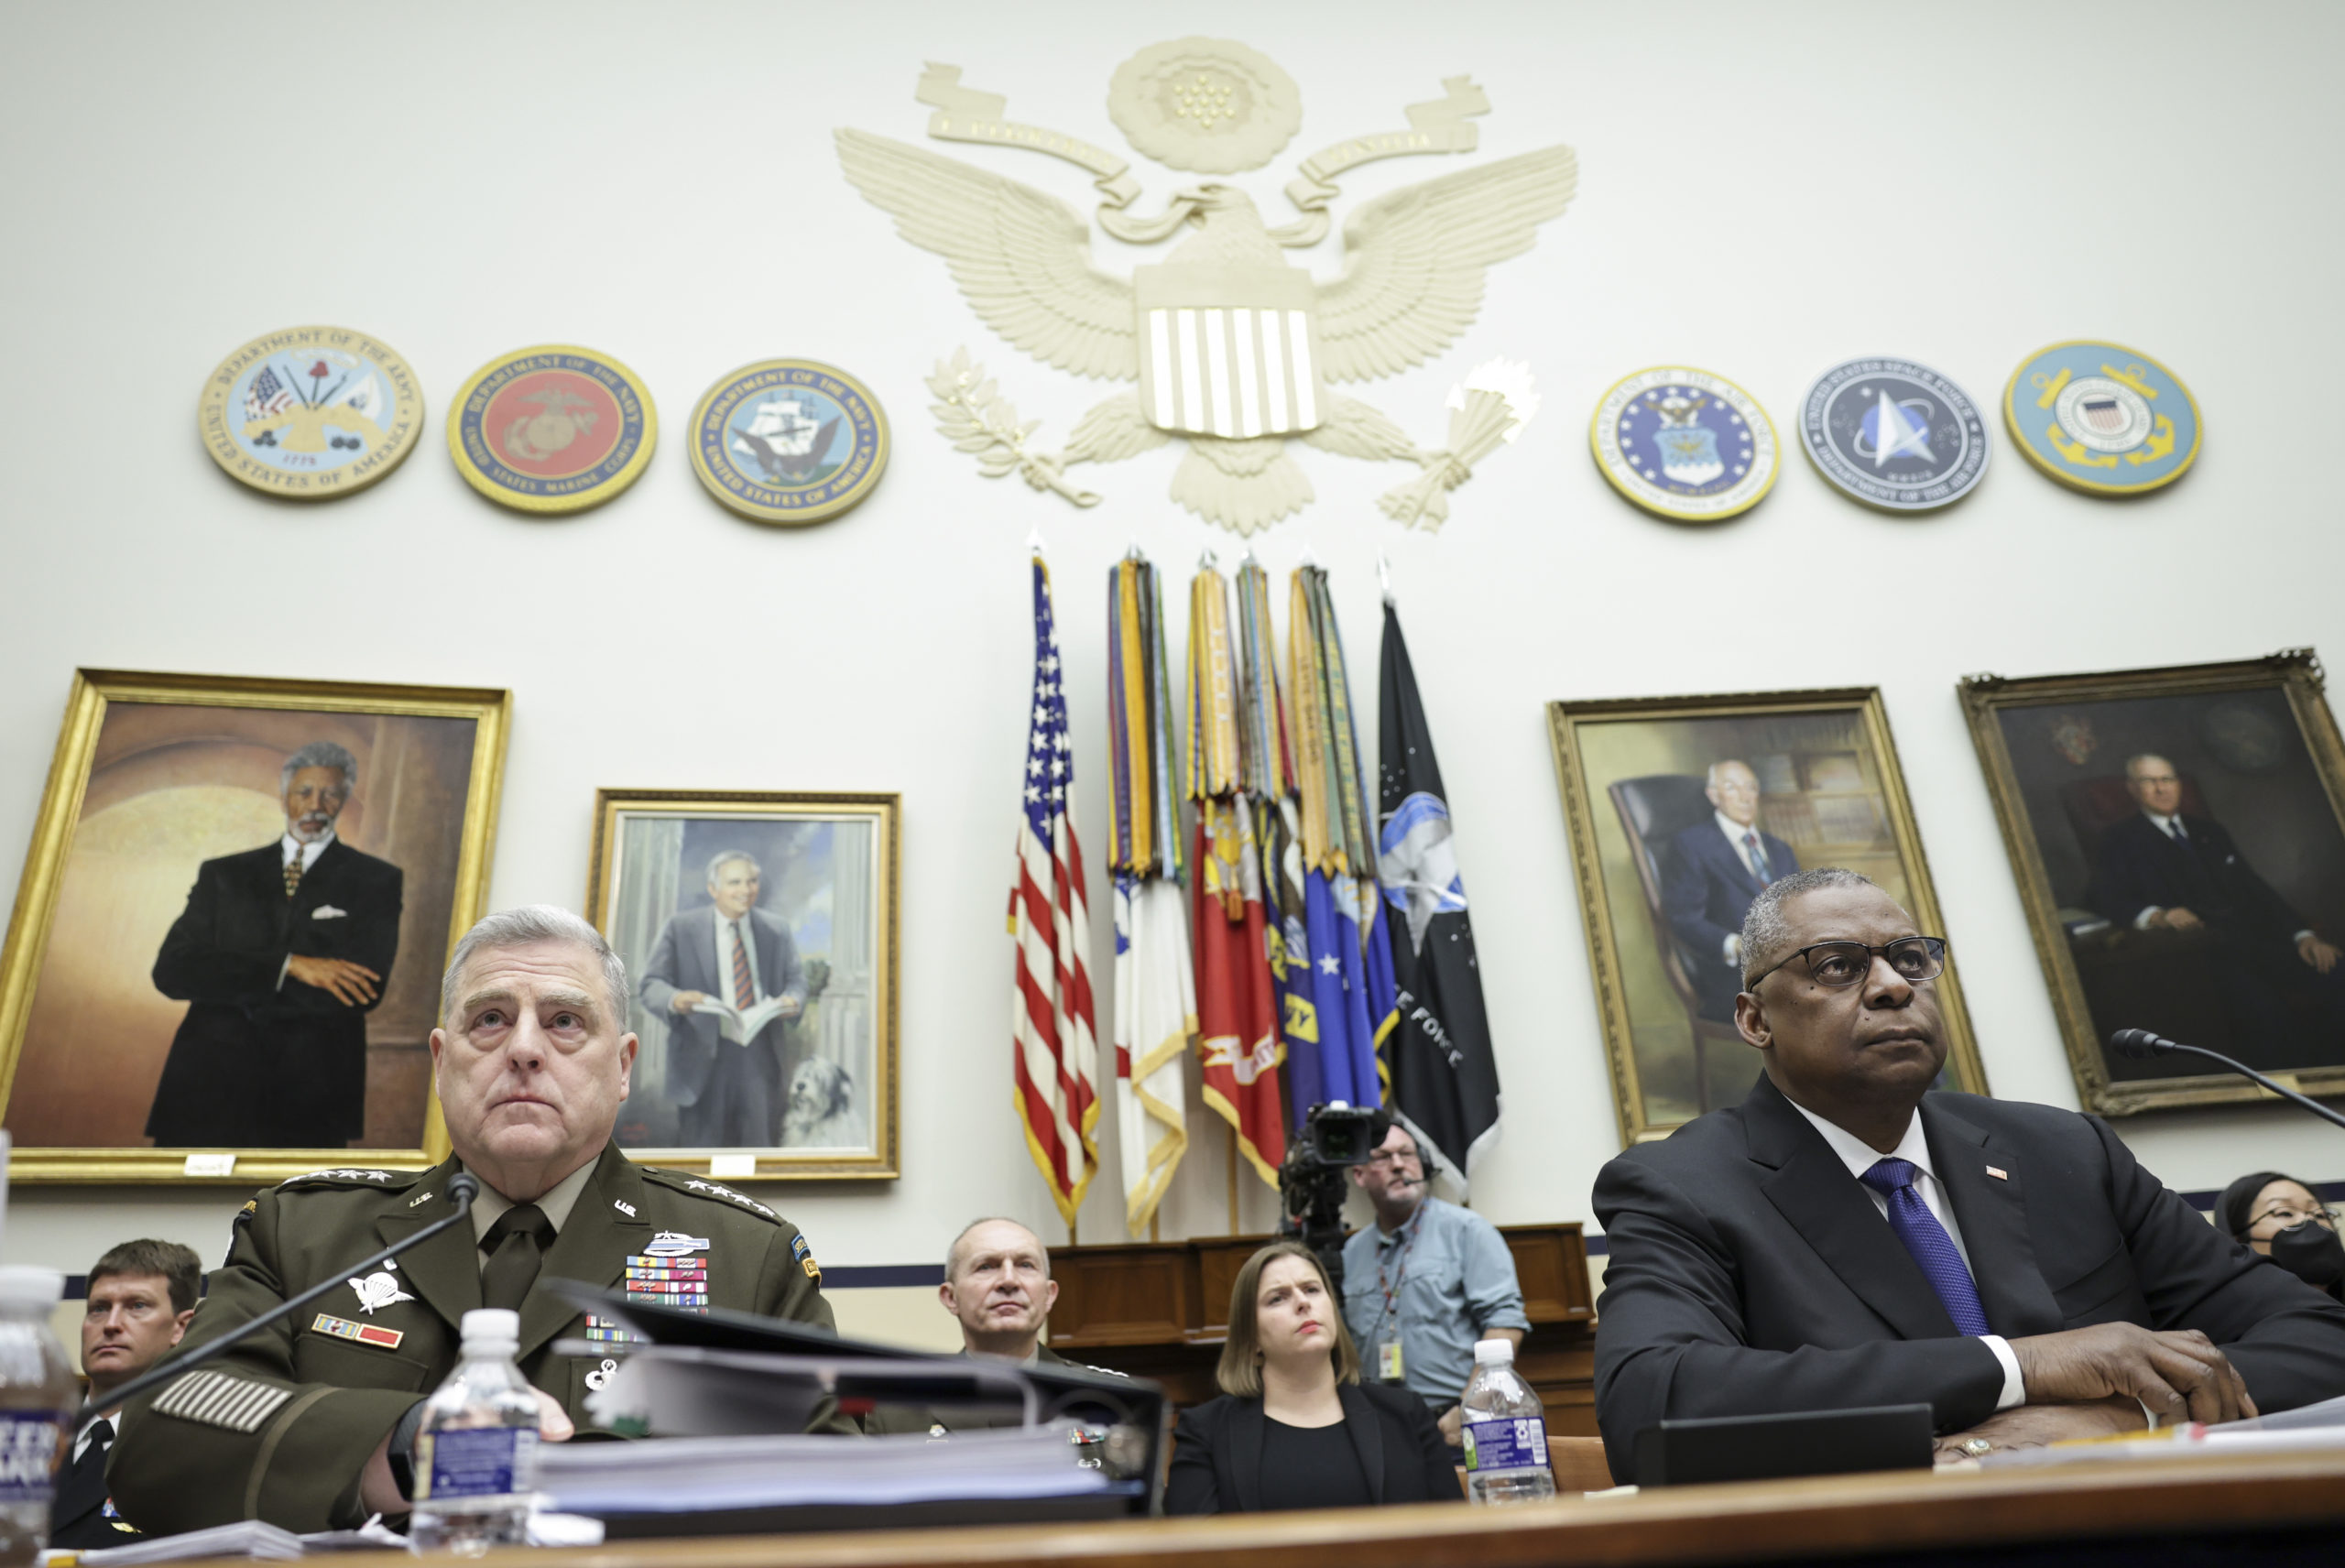 WASHINGTON, DC - APRIL 05: (L-R) Chairman of the Joint Chiefs of Staff Gen. Mark Milley and Secretary of Defense Lloyd Austin testify before the House Armed Services Committee on Capitol Hill, April 5, 2022 in Washington, DC. The Committee held a hearing on the Defense Department's fiscal year 2023 budget request.